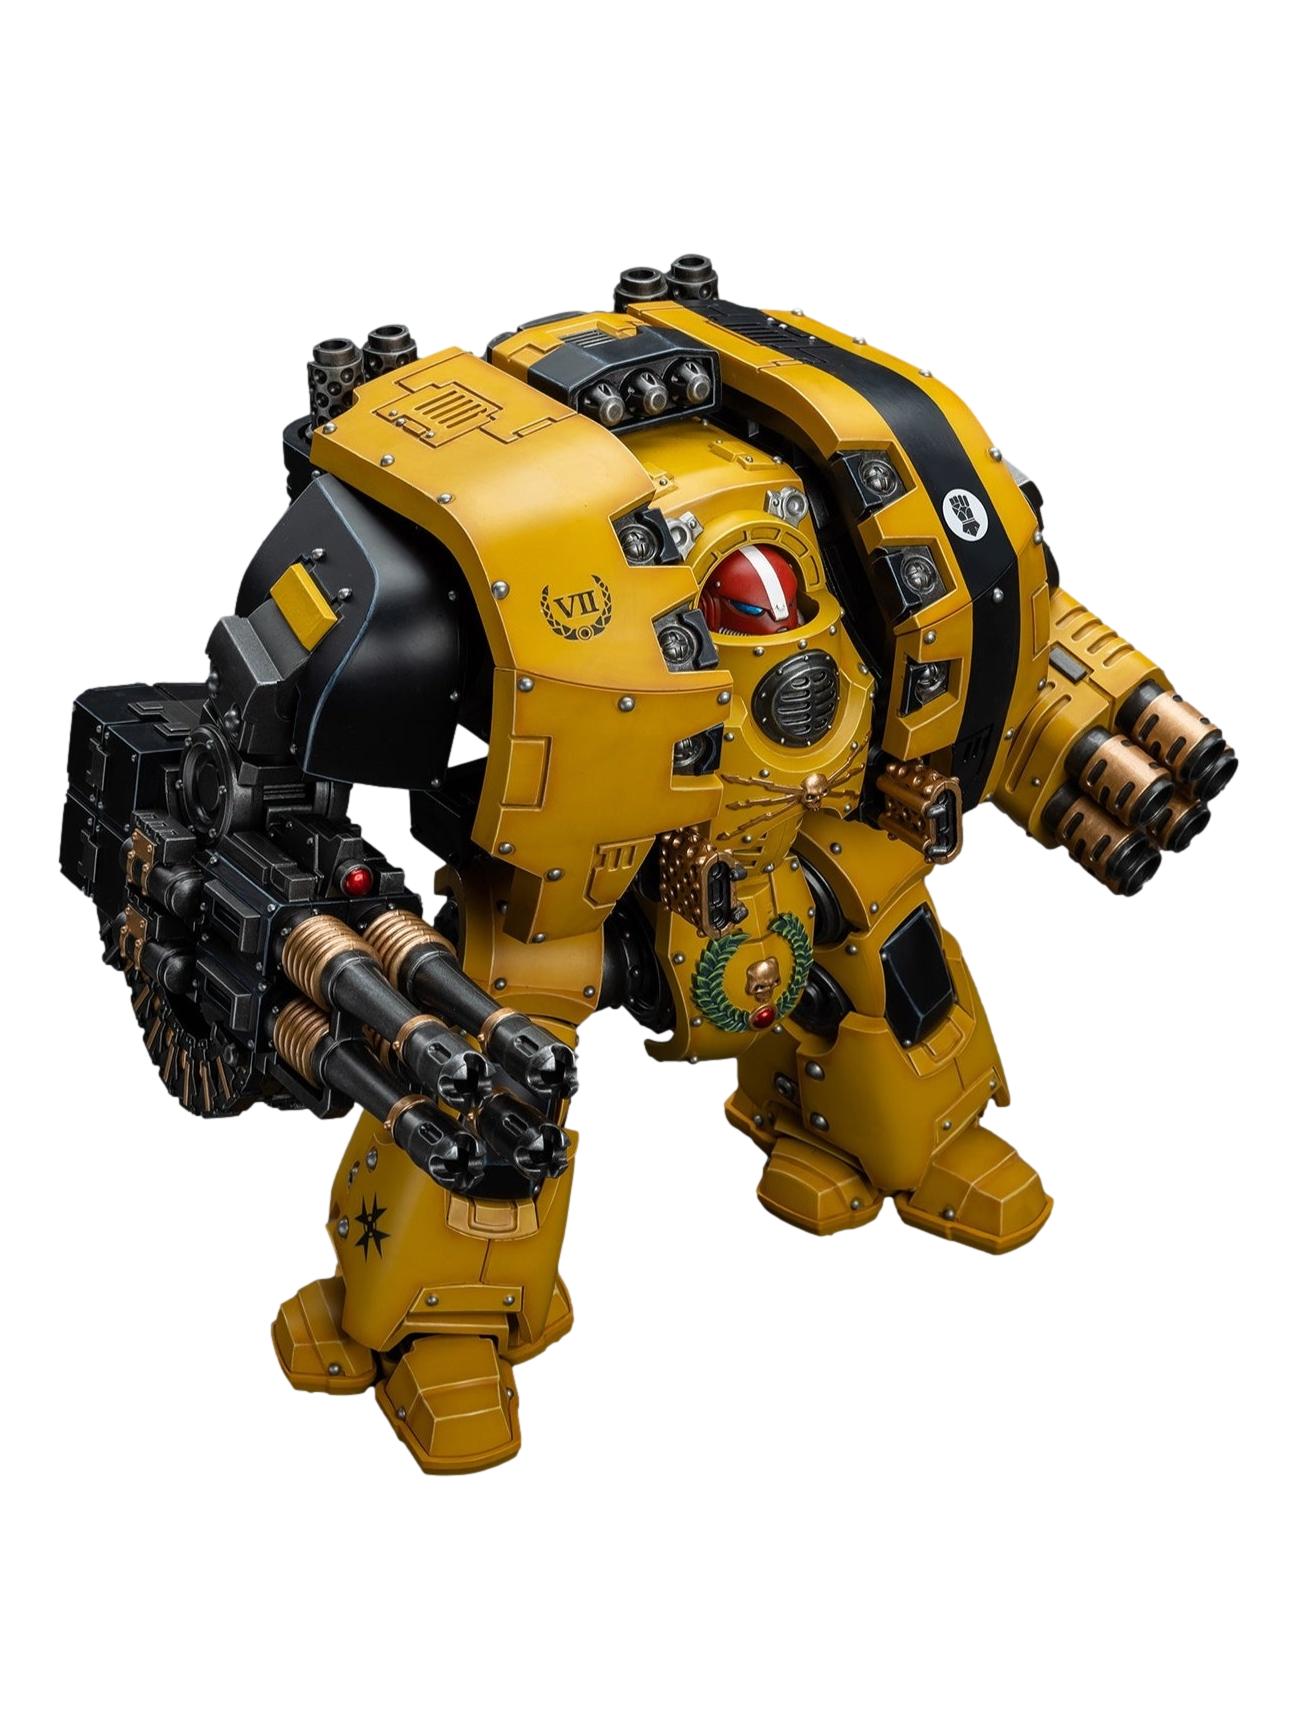 Warhammer The Horus Heresy: Imperial Fists Leviathan Dreadnought with Cyclonic Melta Lance and Storm Cannon Joy Toy